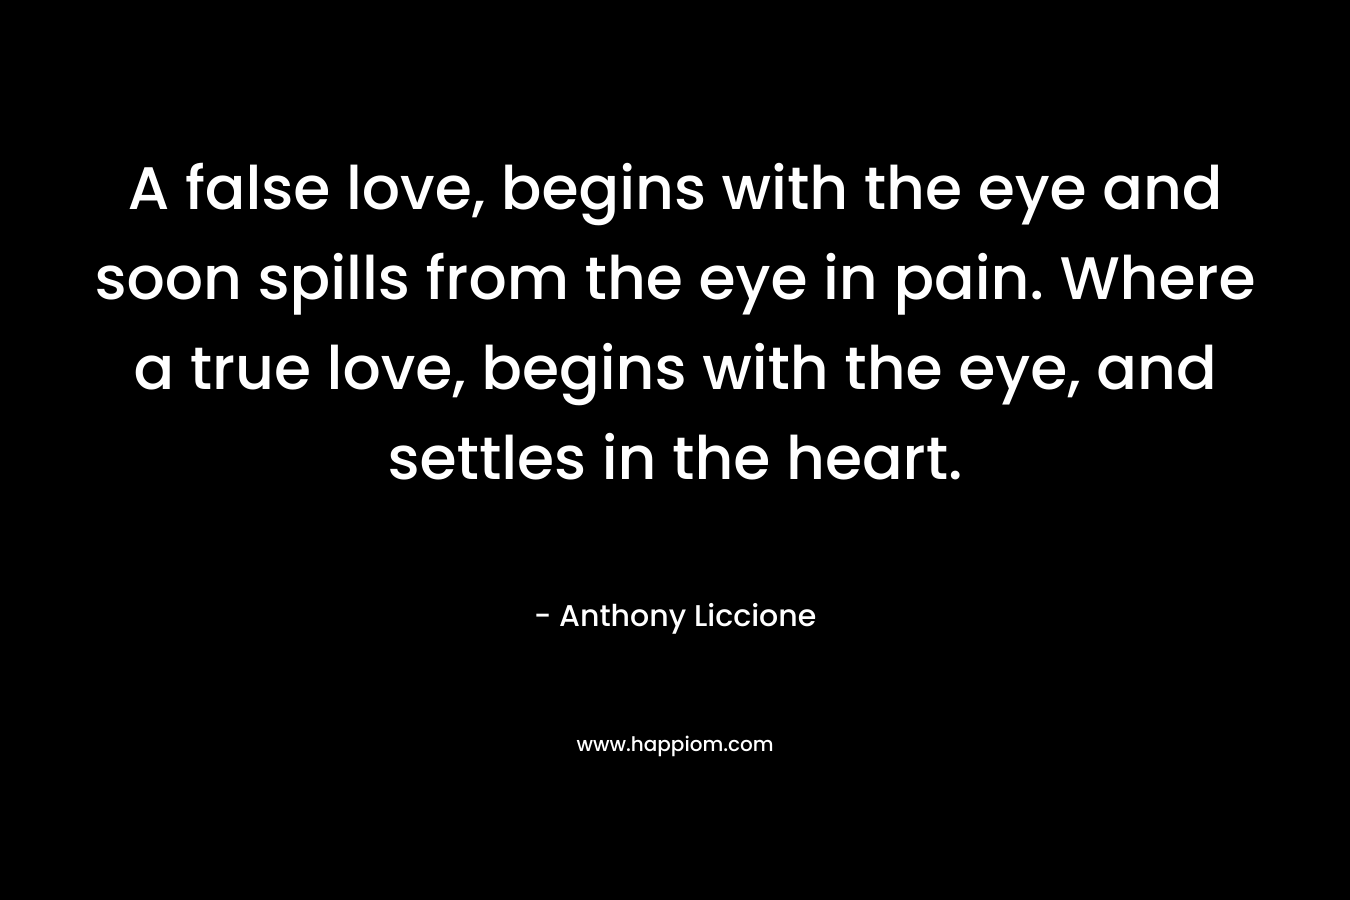 A false love, begins with the eye and soon spills from the eye in pain. Where a true love, begins with the eye, and settles in the heart. – Anthony Liccione